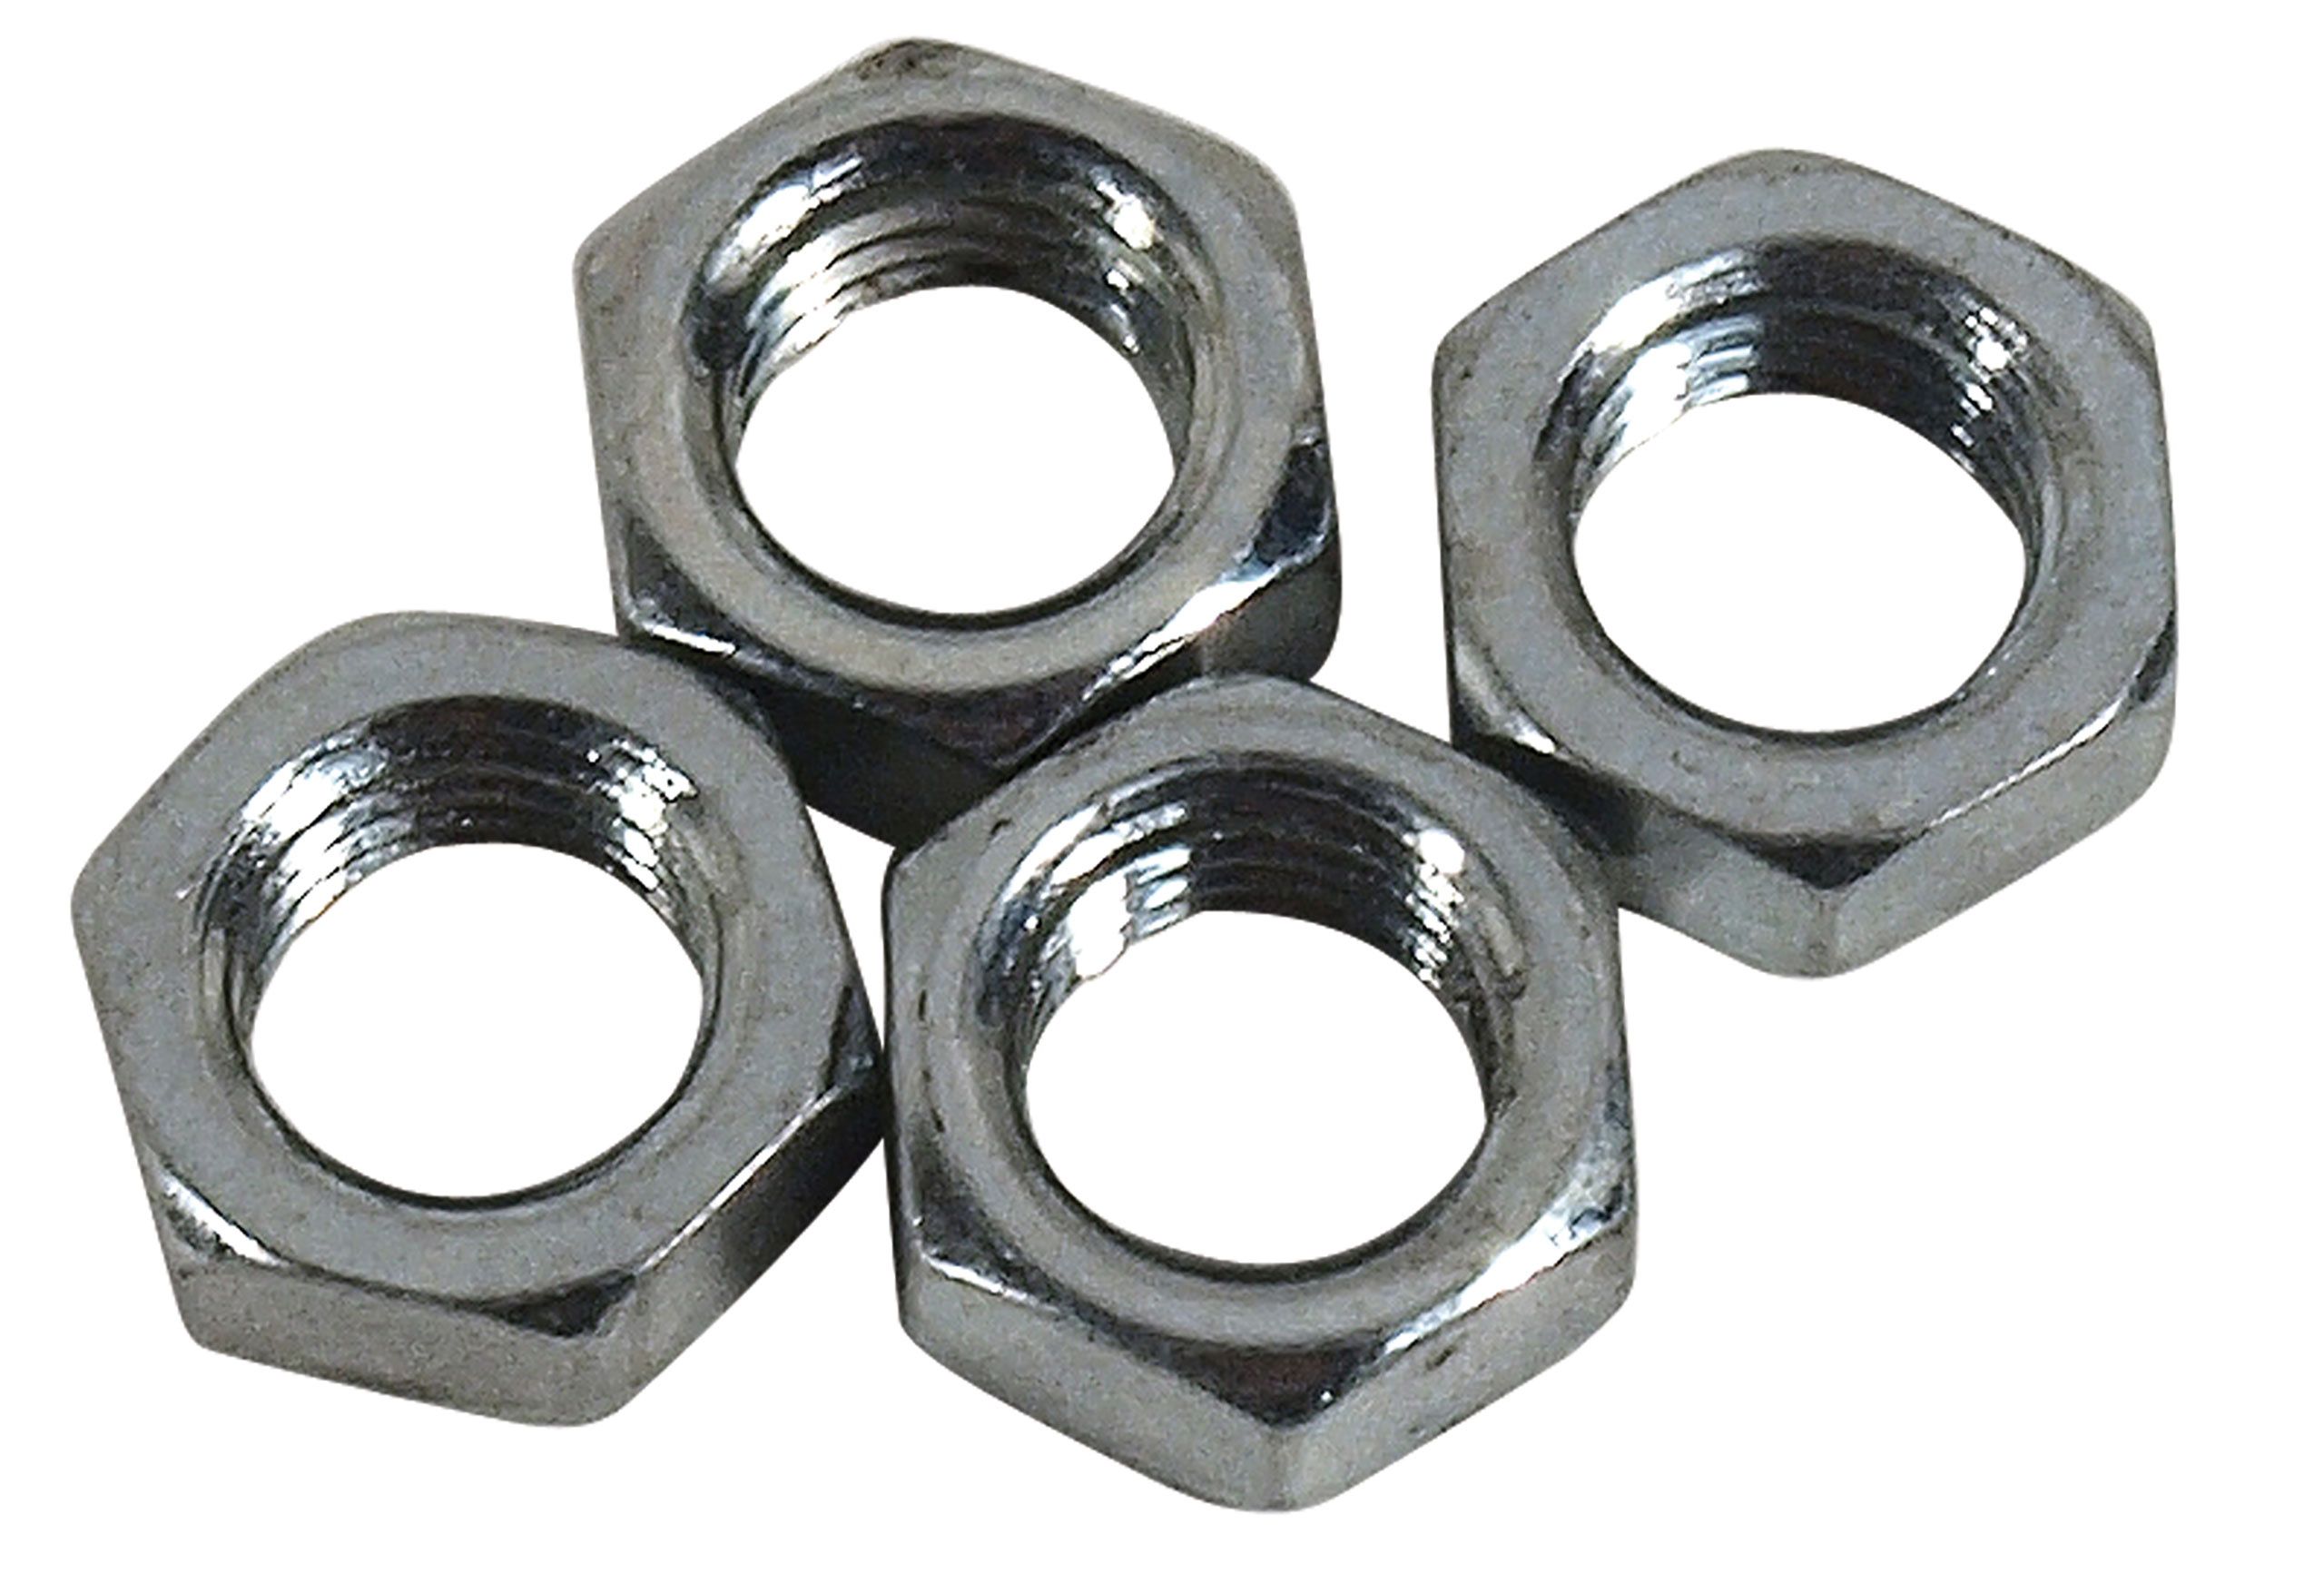 Auto Accessories of America 1964-1973 Ford Mustang Carburetor Hold-down Nuts - 4 pieces